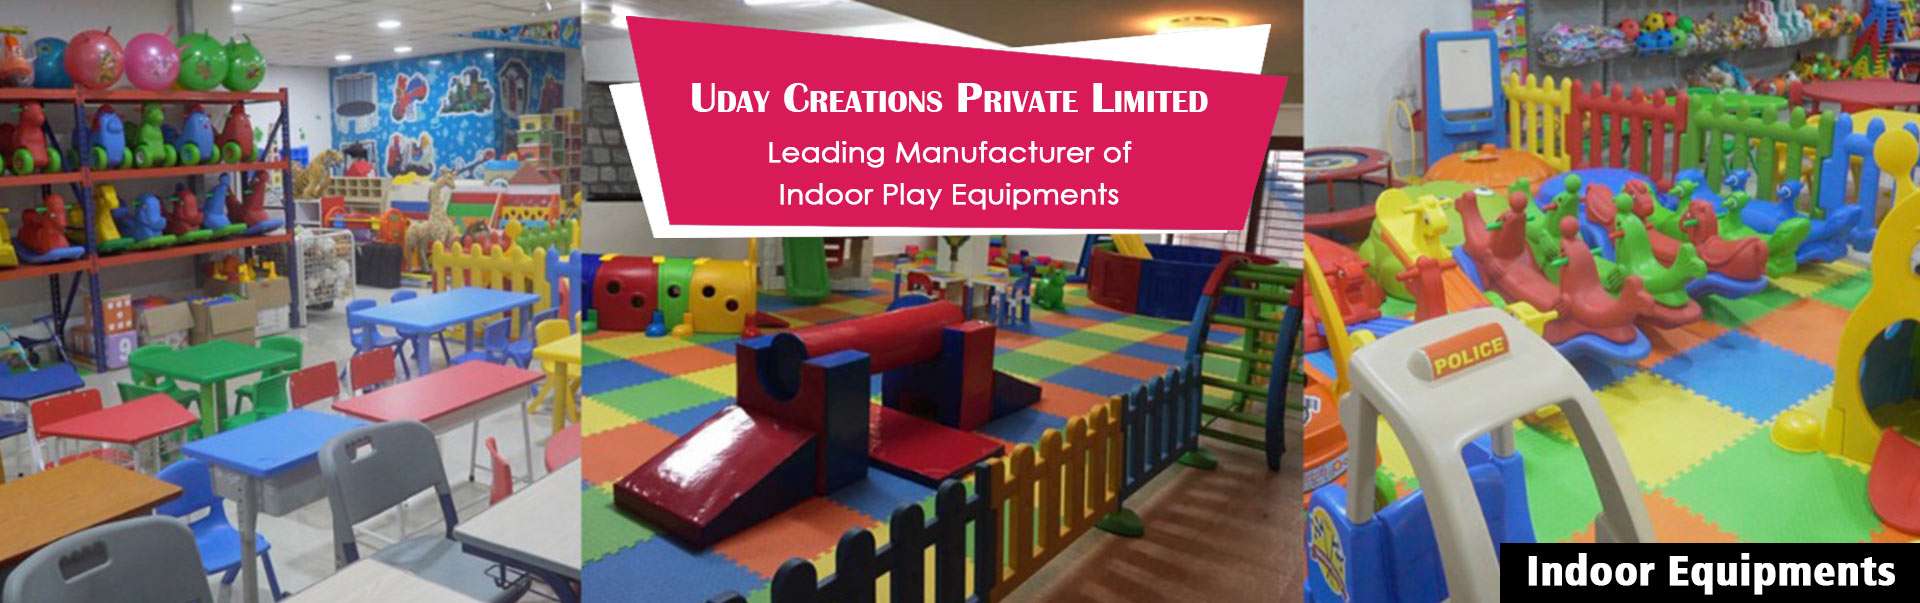  Uday Creations Pvt Ltd in Assam